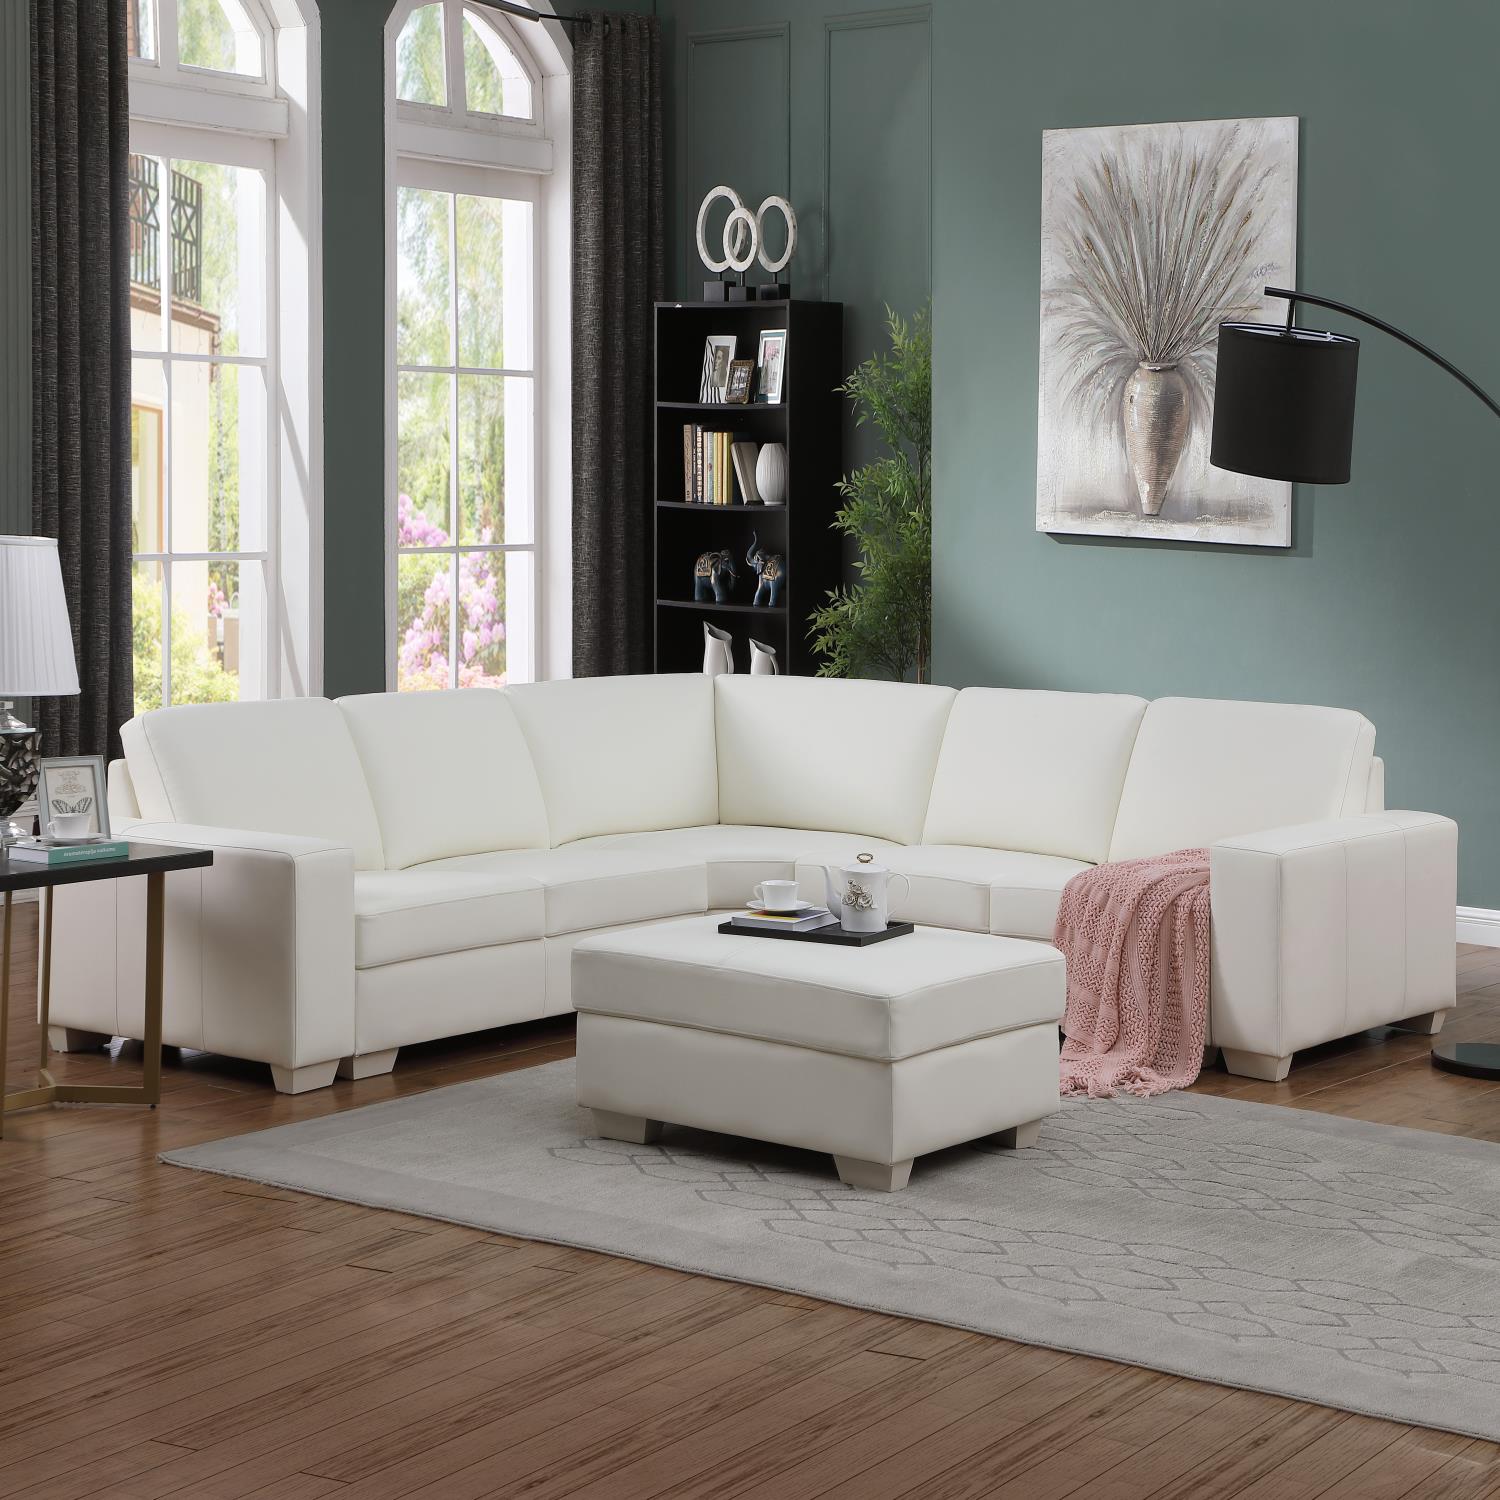 Ainehome White Cowhide Leather 6 Seater Combination Sofa Set